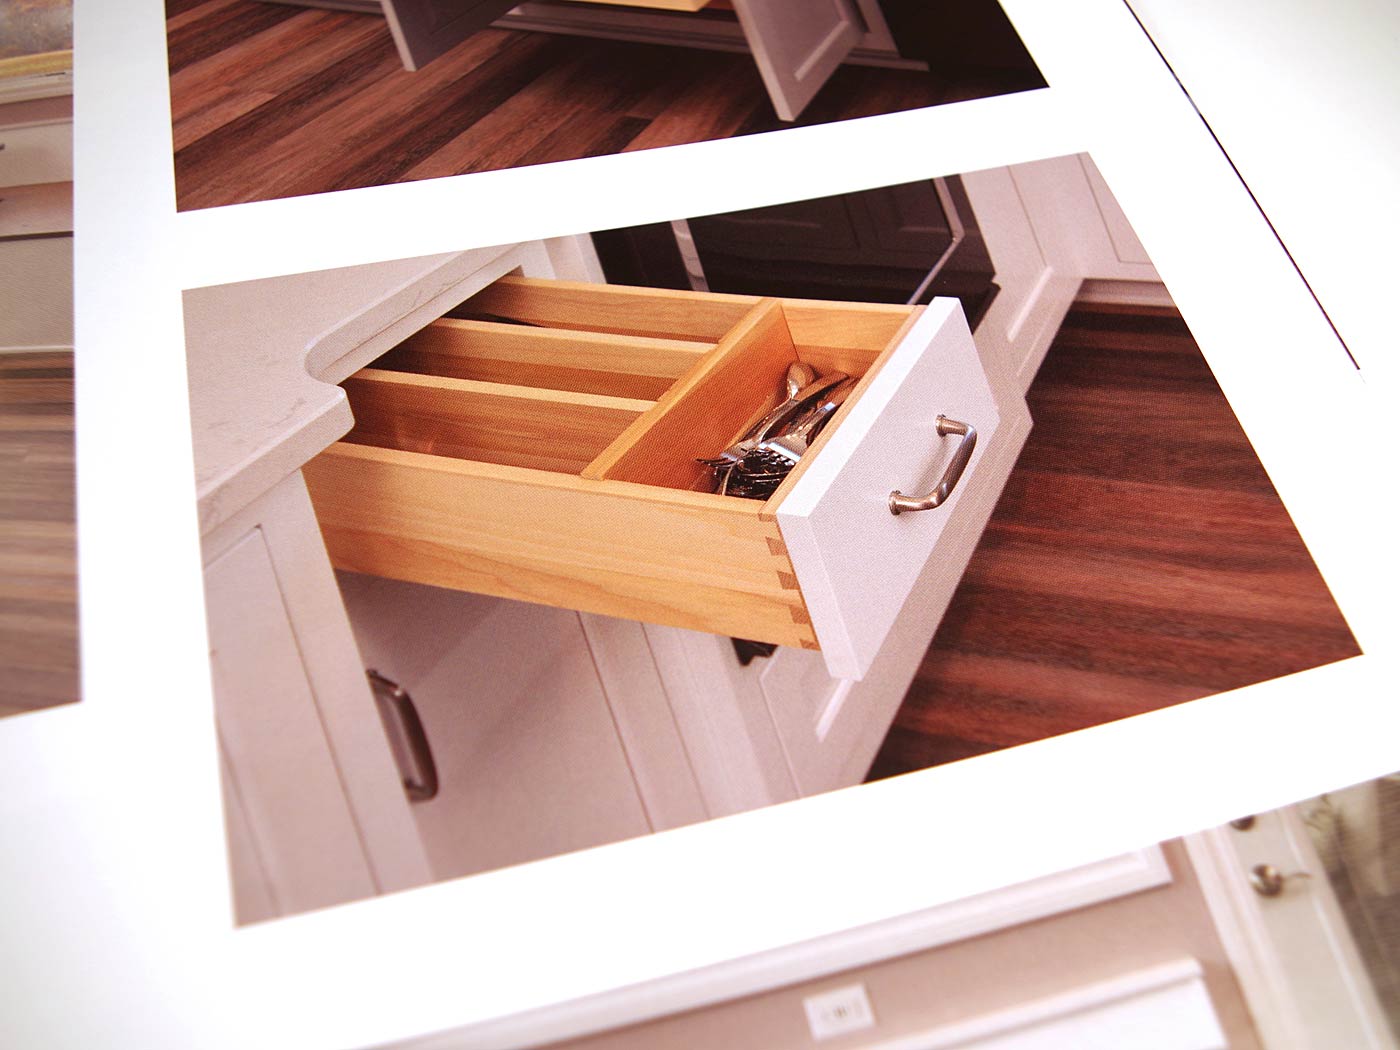 Precision Woodworking look book detail